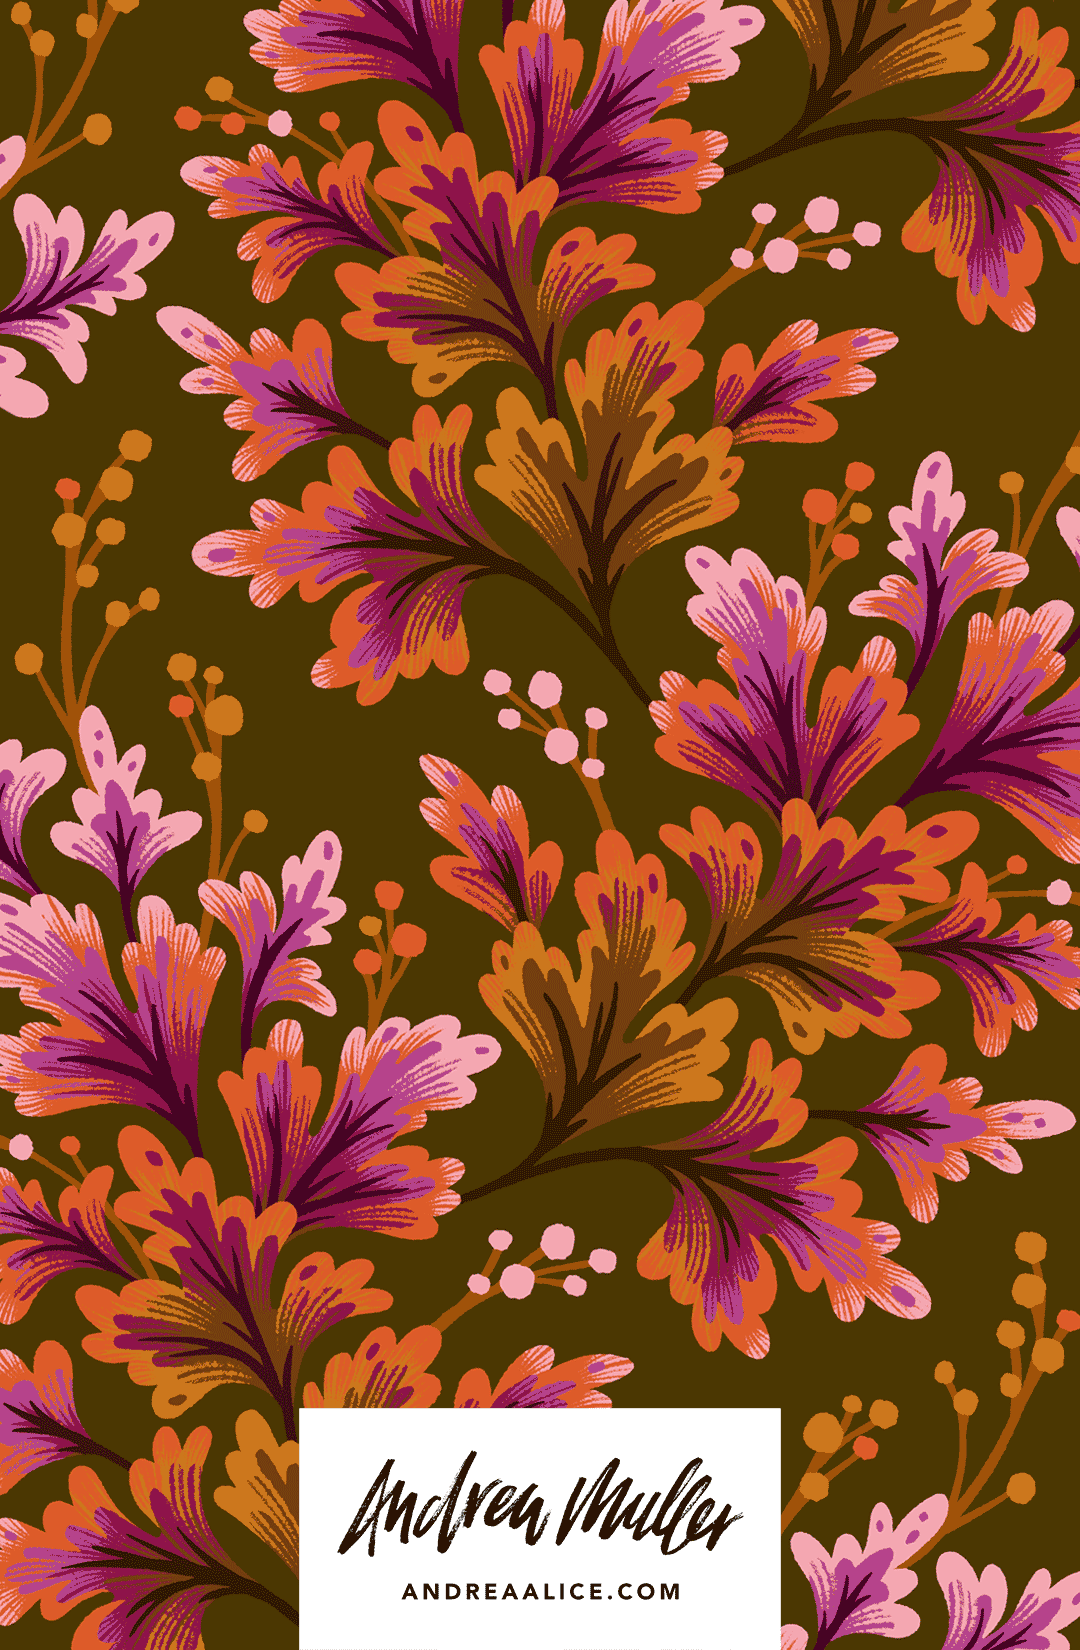 Retro scalloped frilly leaf foliage repeat pattern illustration olive green and orange by Andrea Muller